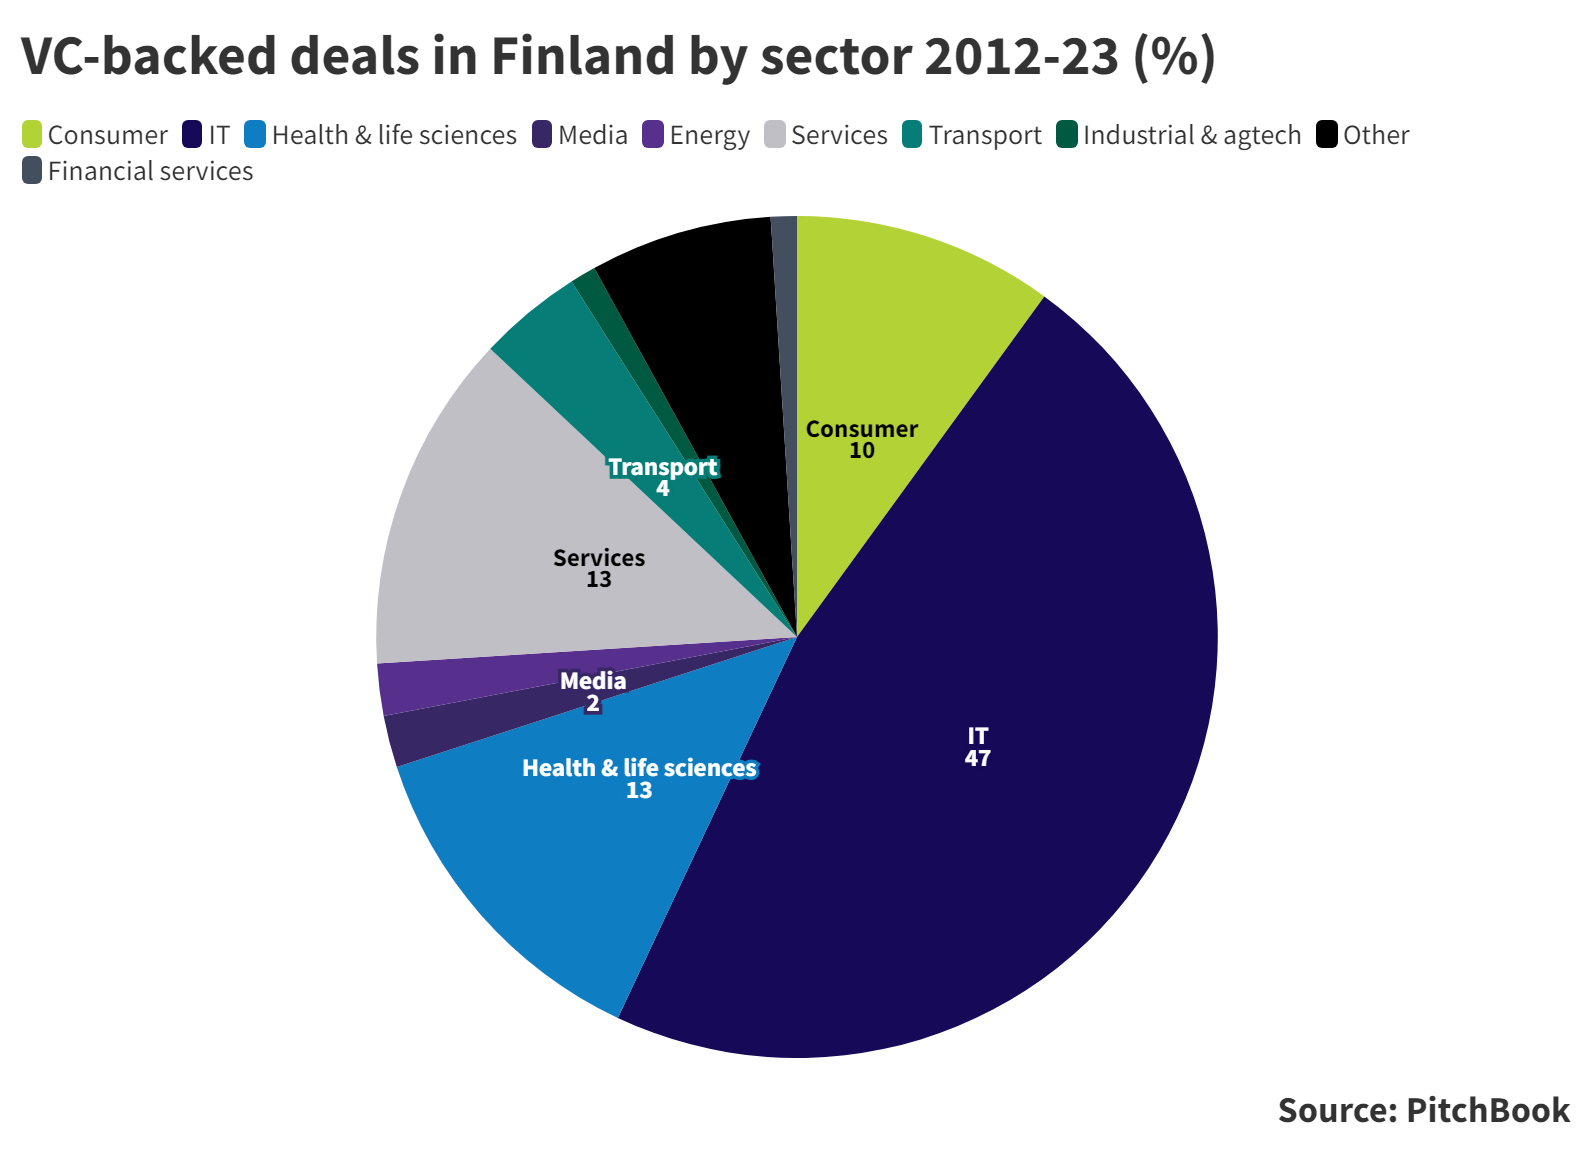 Pie chart showing VC-backed deals in Finland broken down by sector percentage-wise 2012-23. Source: PitchBook